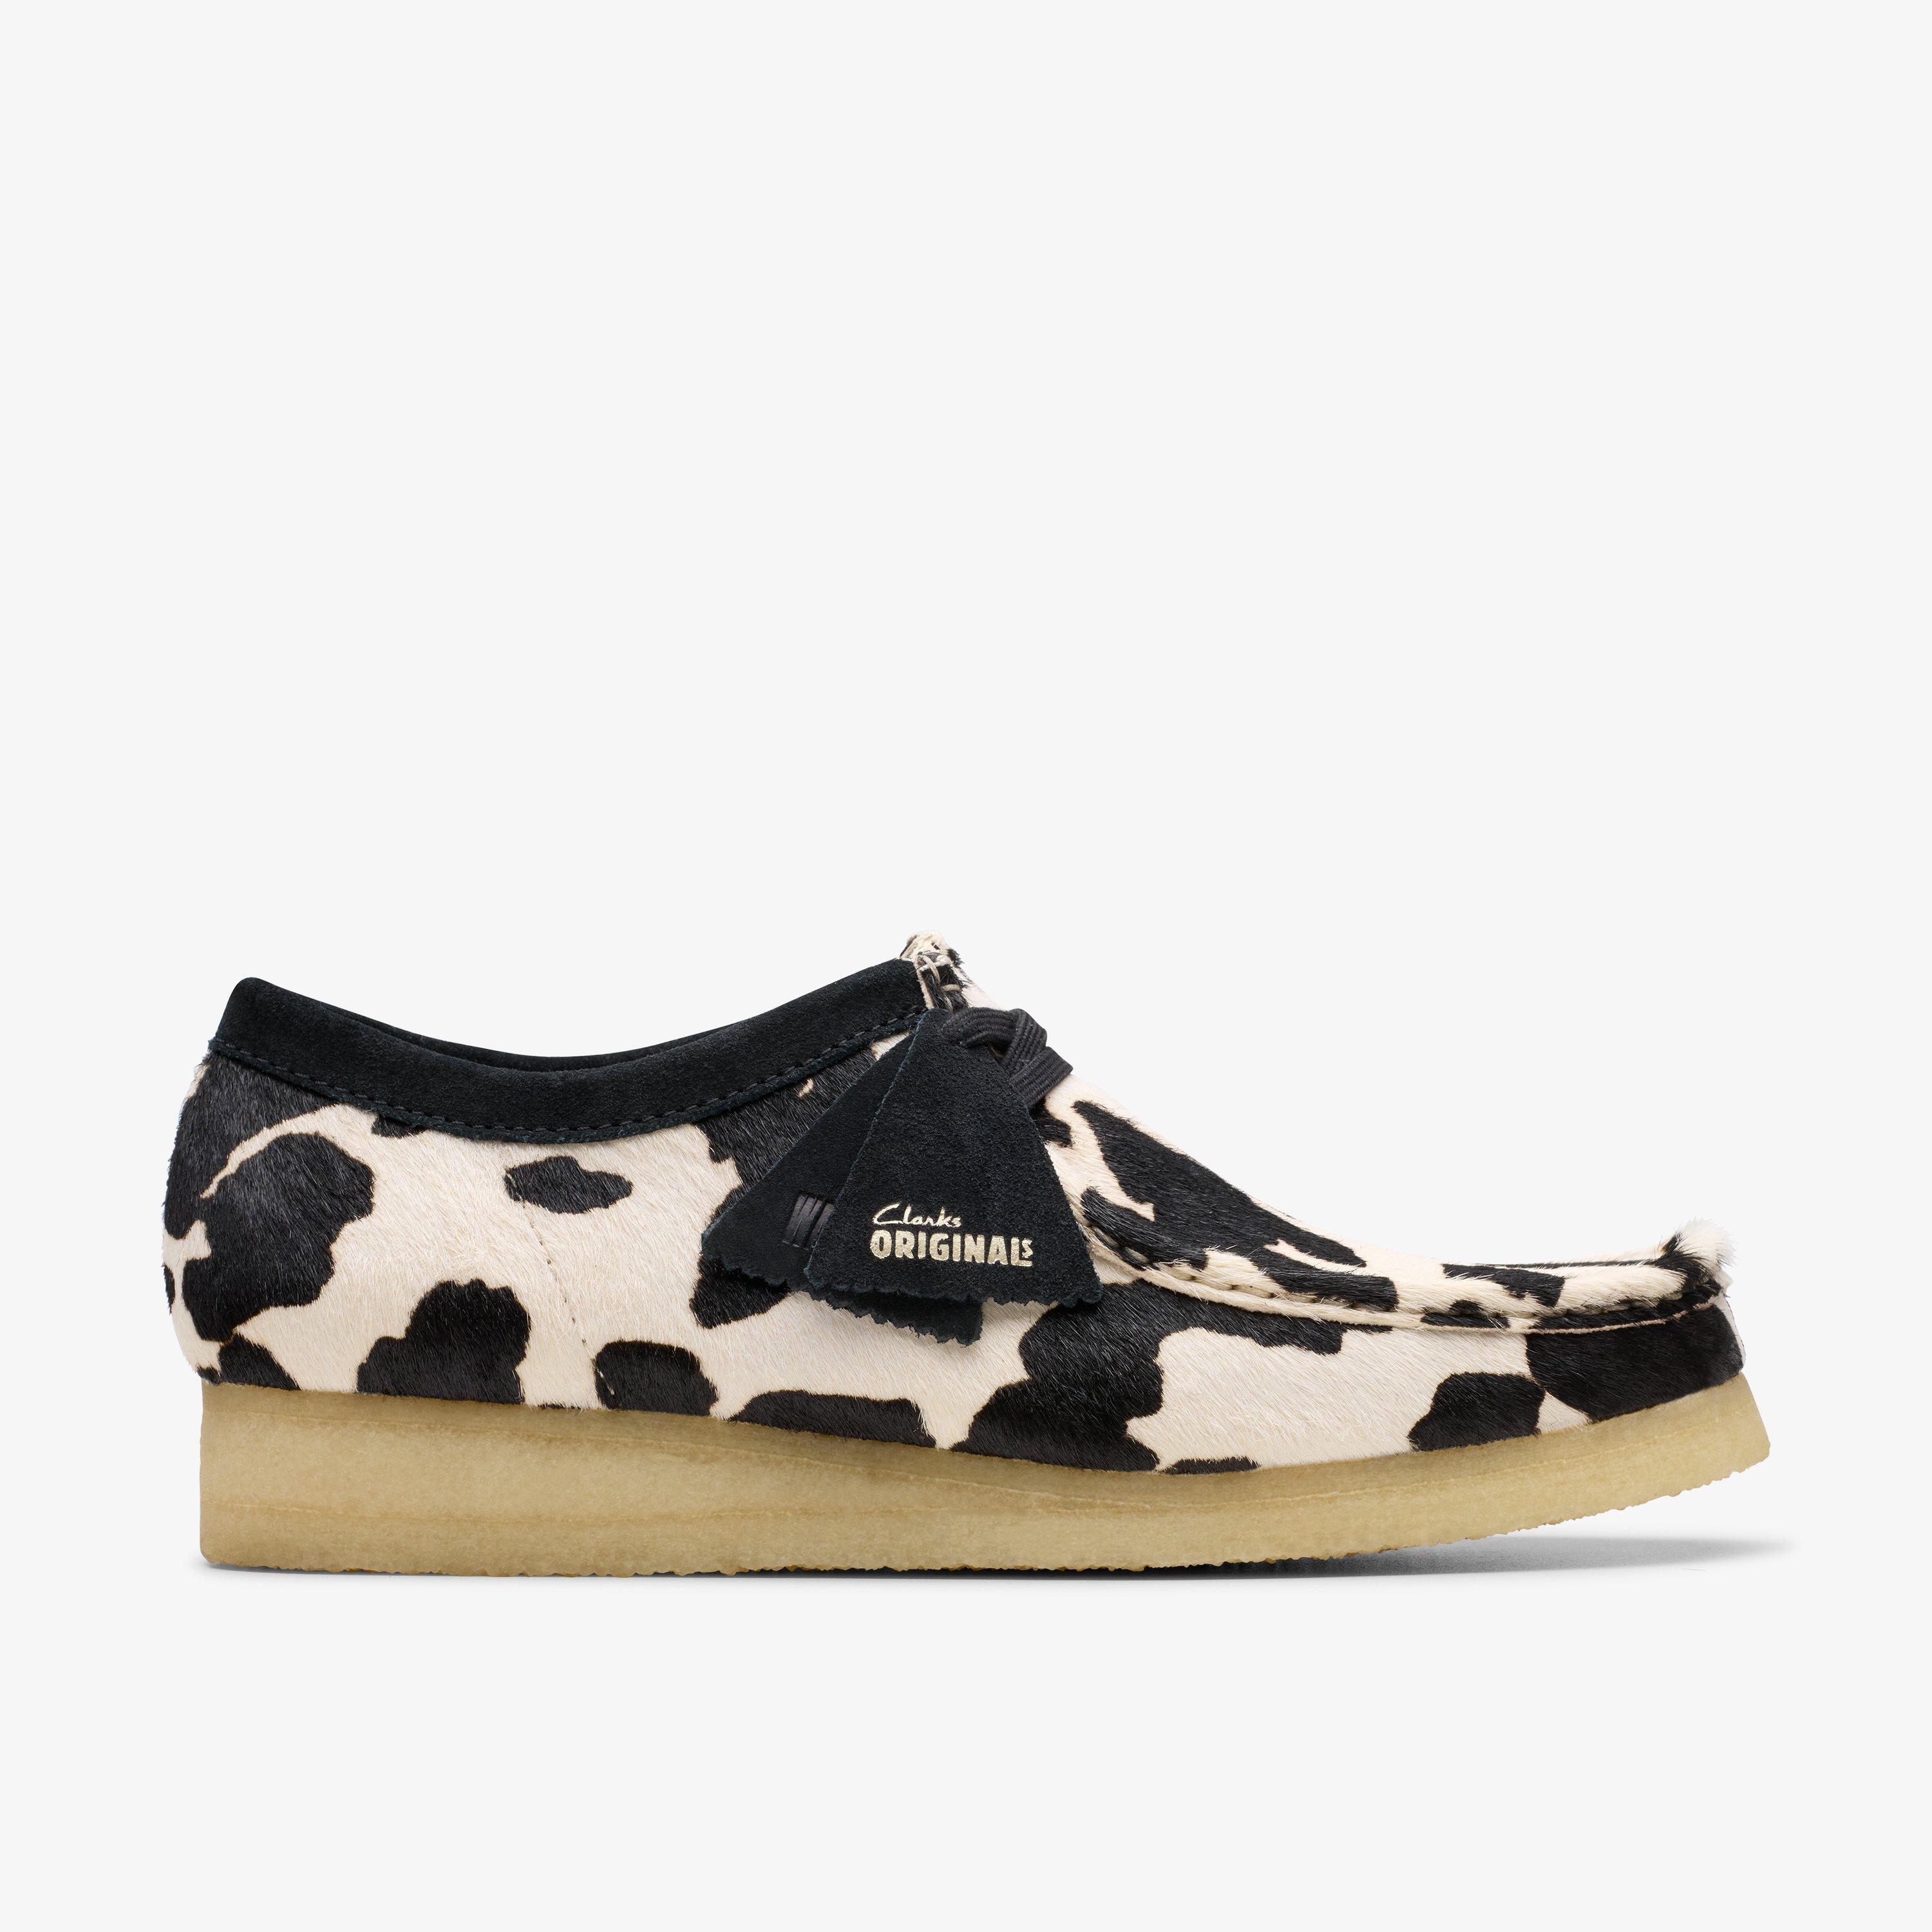 Size 12 Clarks Originals Wallabee Cow Print Hair On shoes